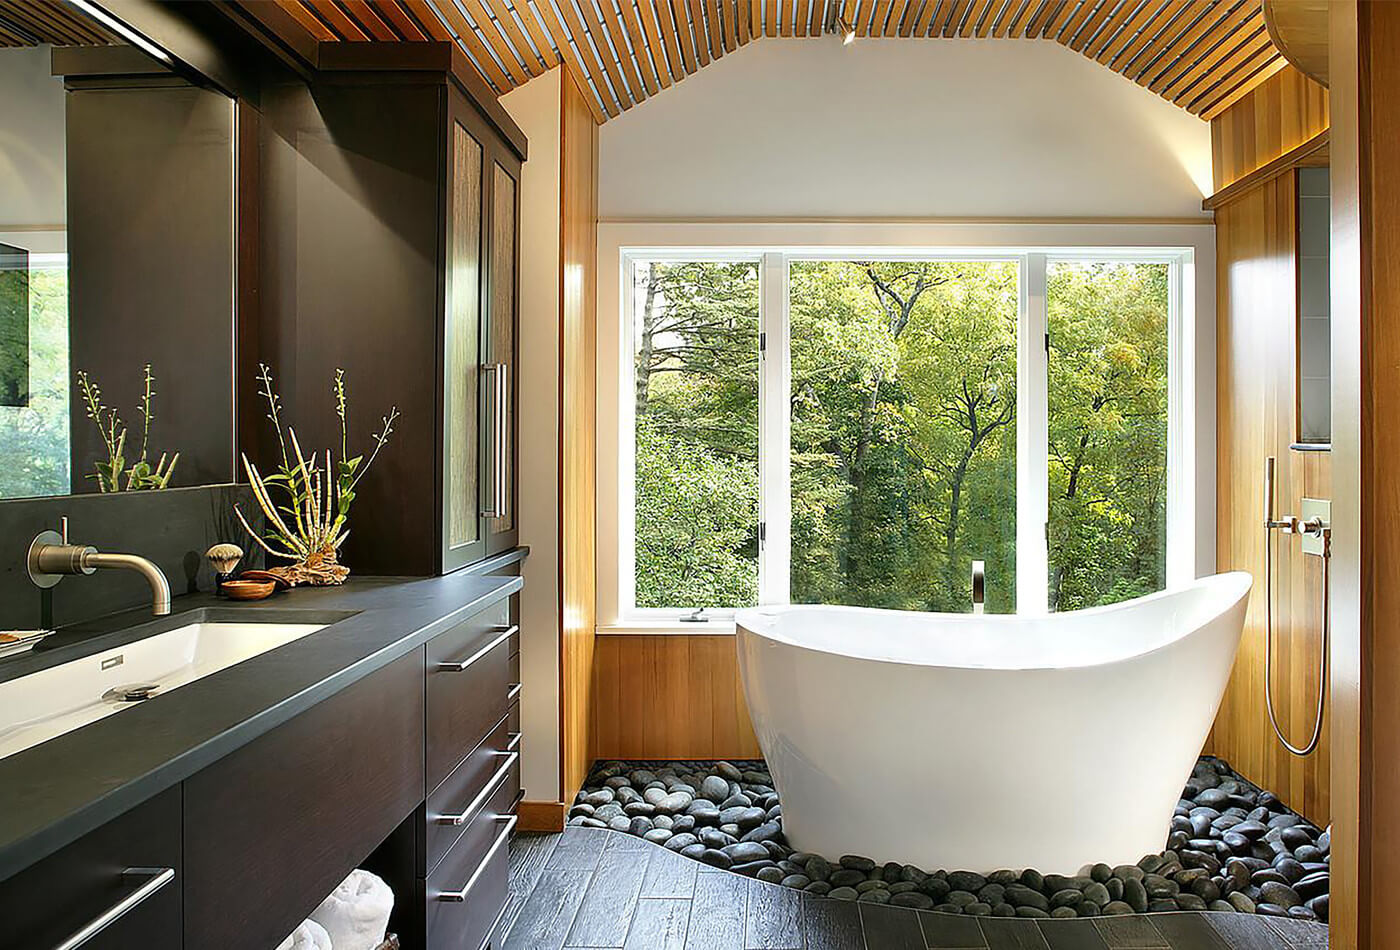 Japanese style bathroom design: simplicity in its purest form - Hackrea